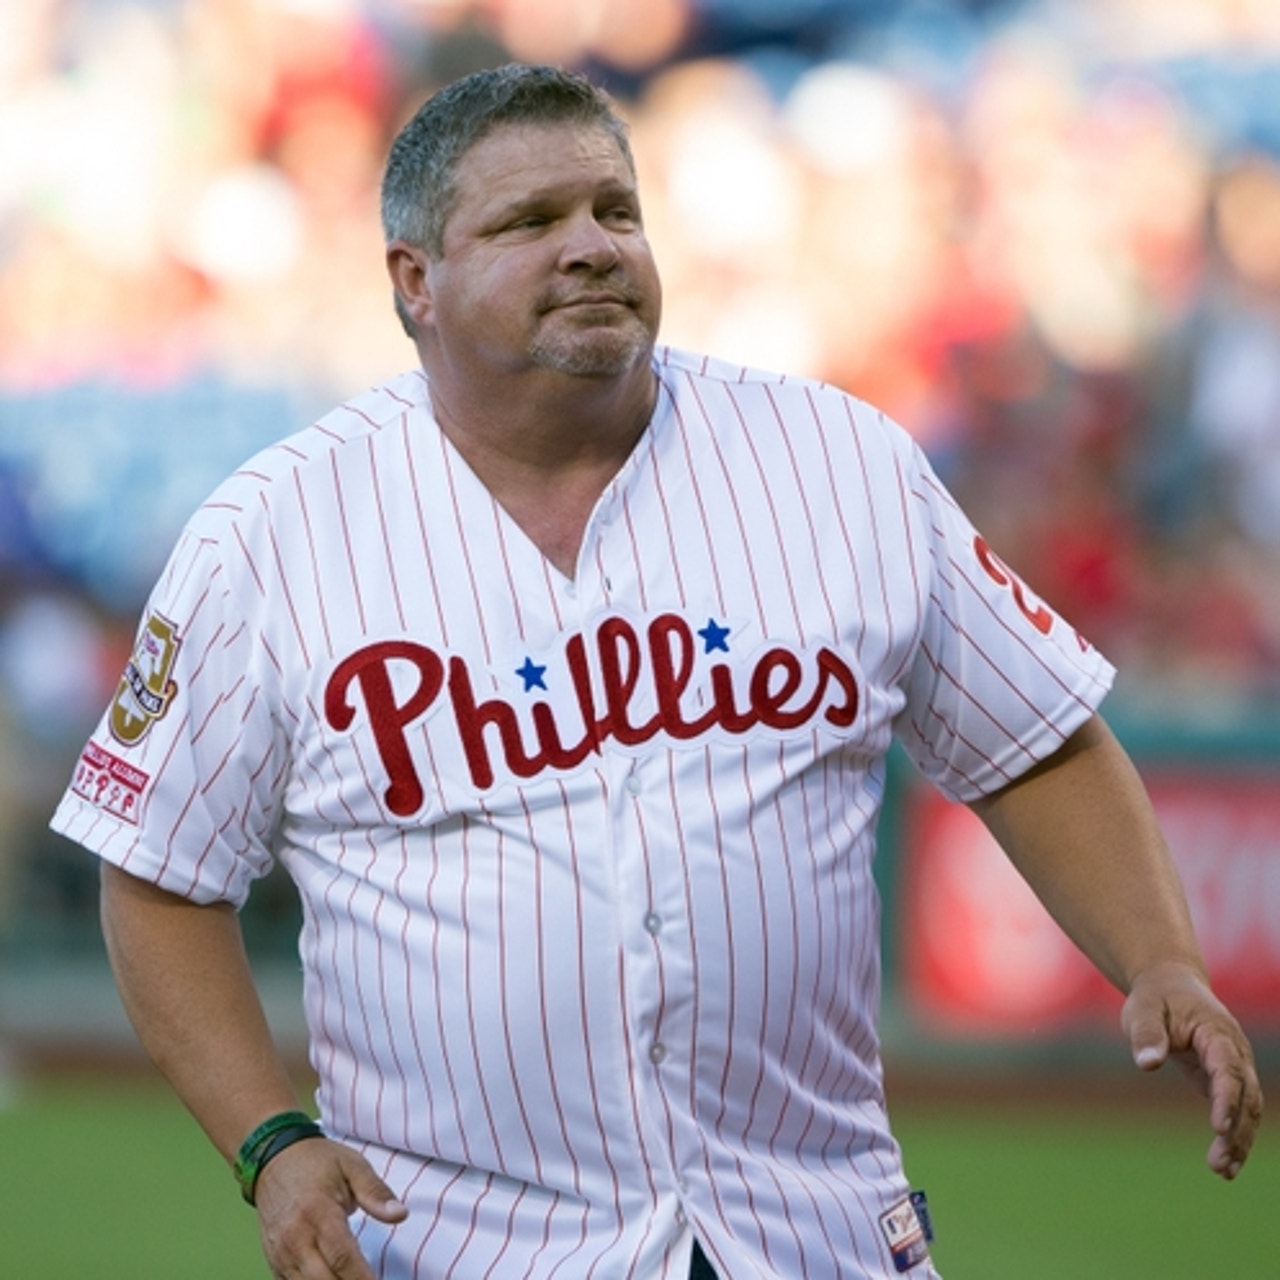 This Day in Transaction History: Phillies acquire John Kruk from